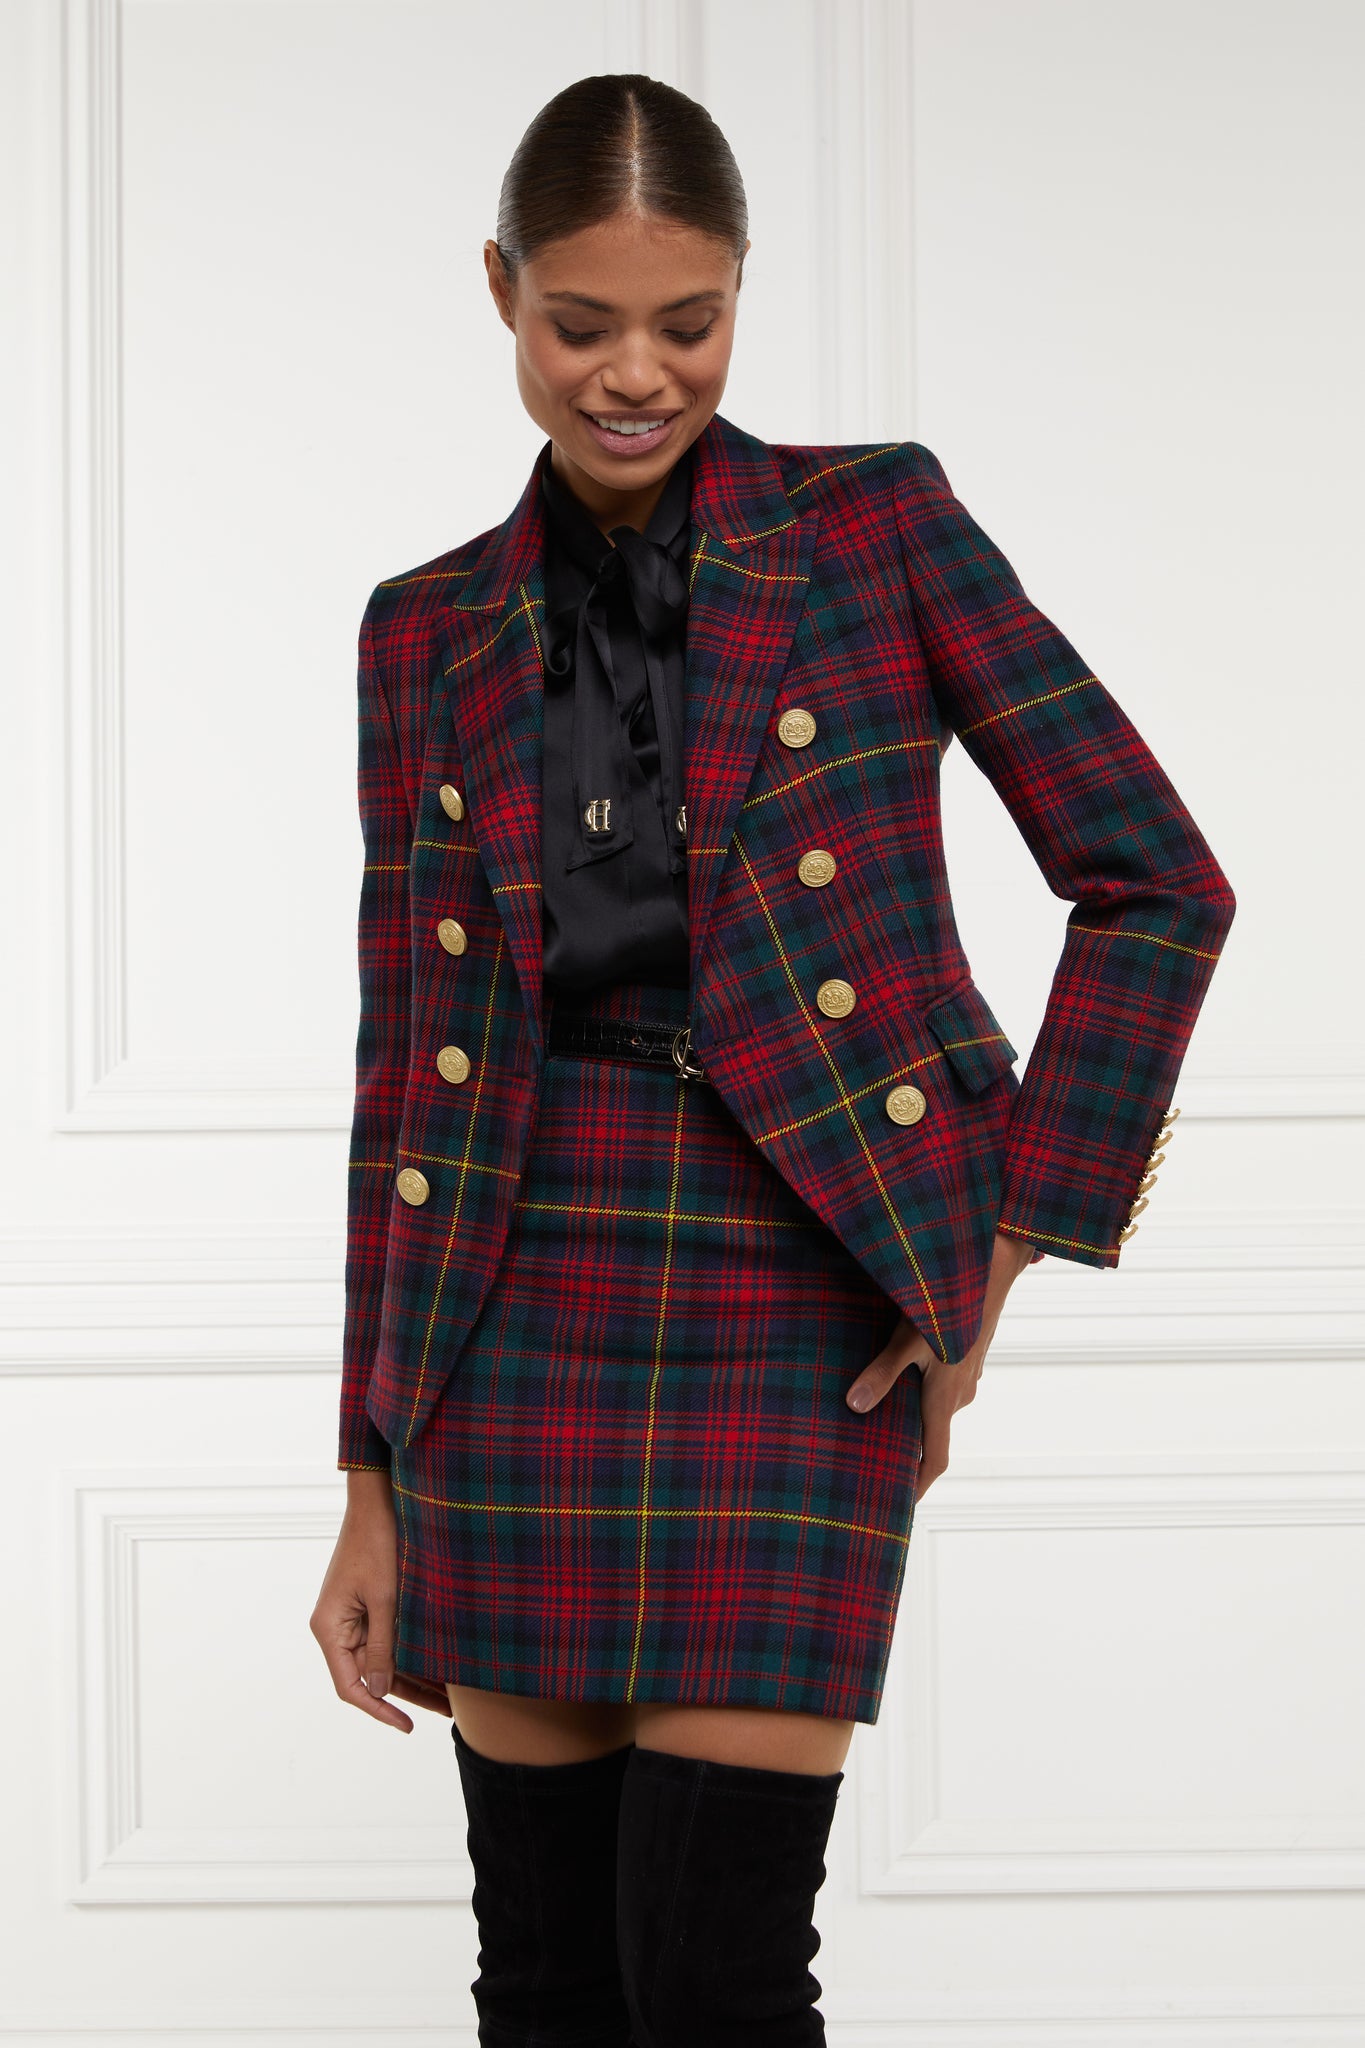 British made double breasted blazer that fastens with a single button hole to create a more form fitting silhouette with two pockets and gold button detailing this blazer is made from  red green navy and yellow logan tartan worn with black shirt and skirt in matching tartan pattern